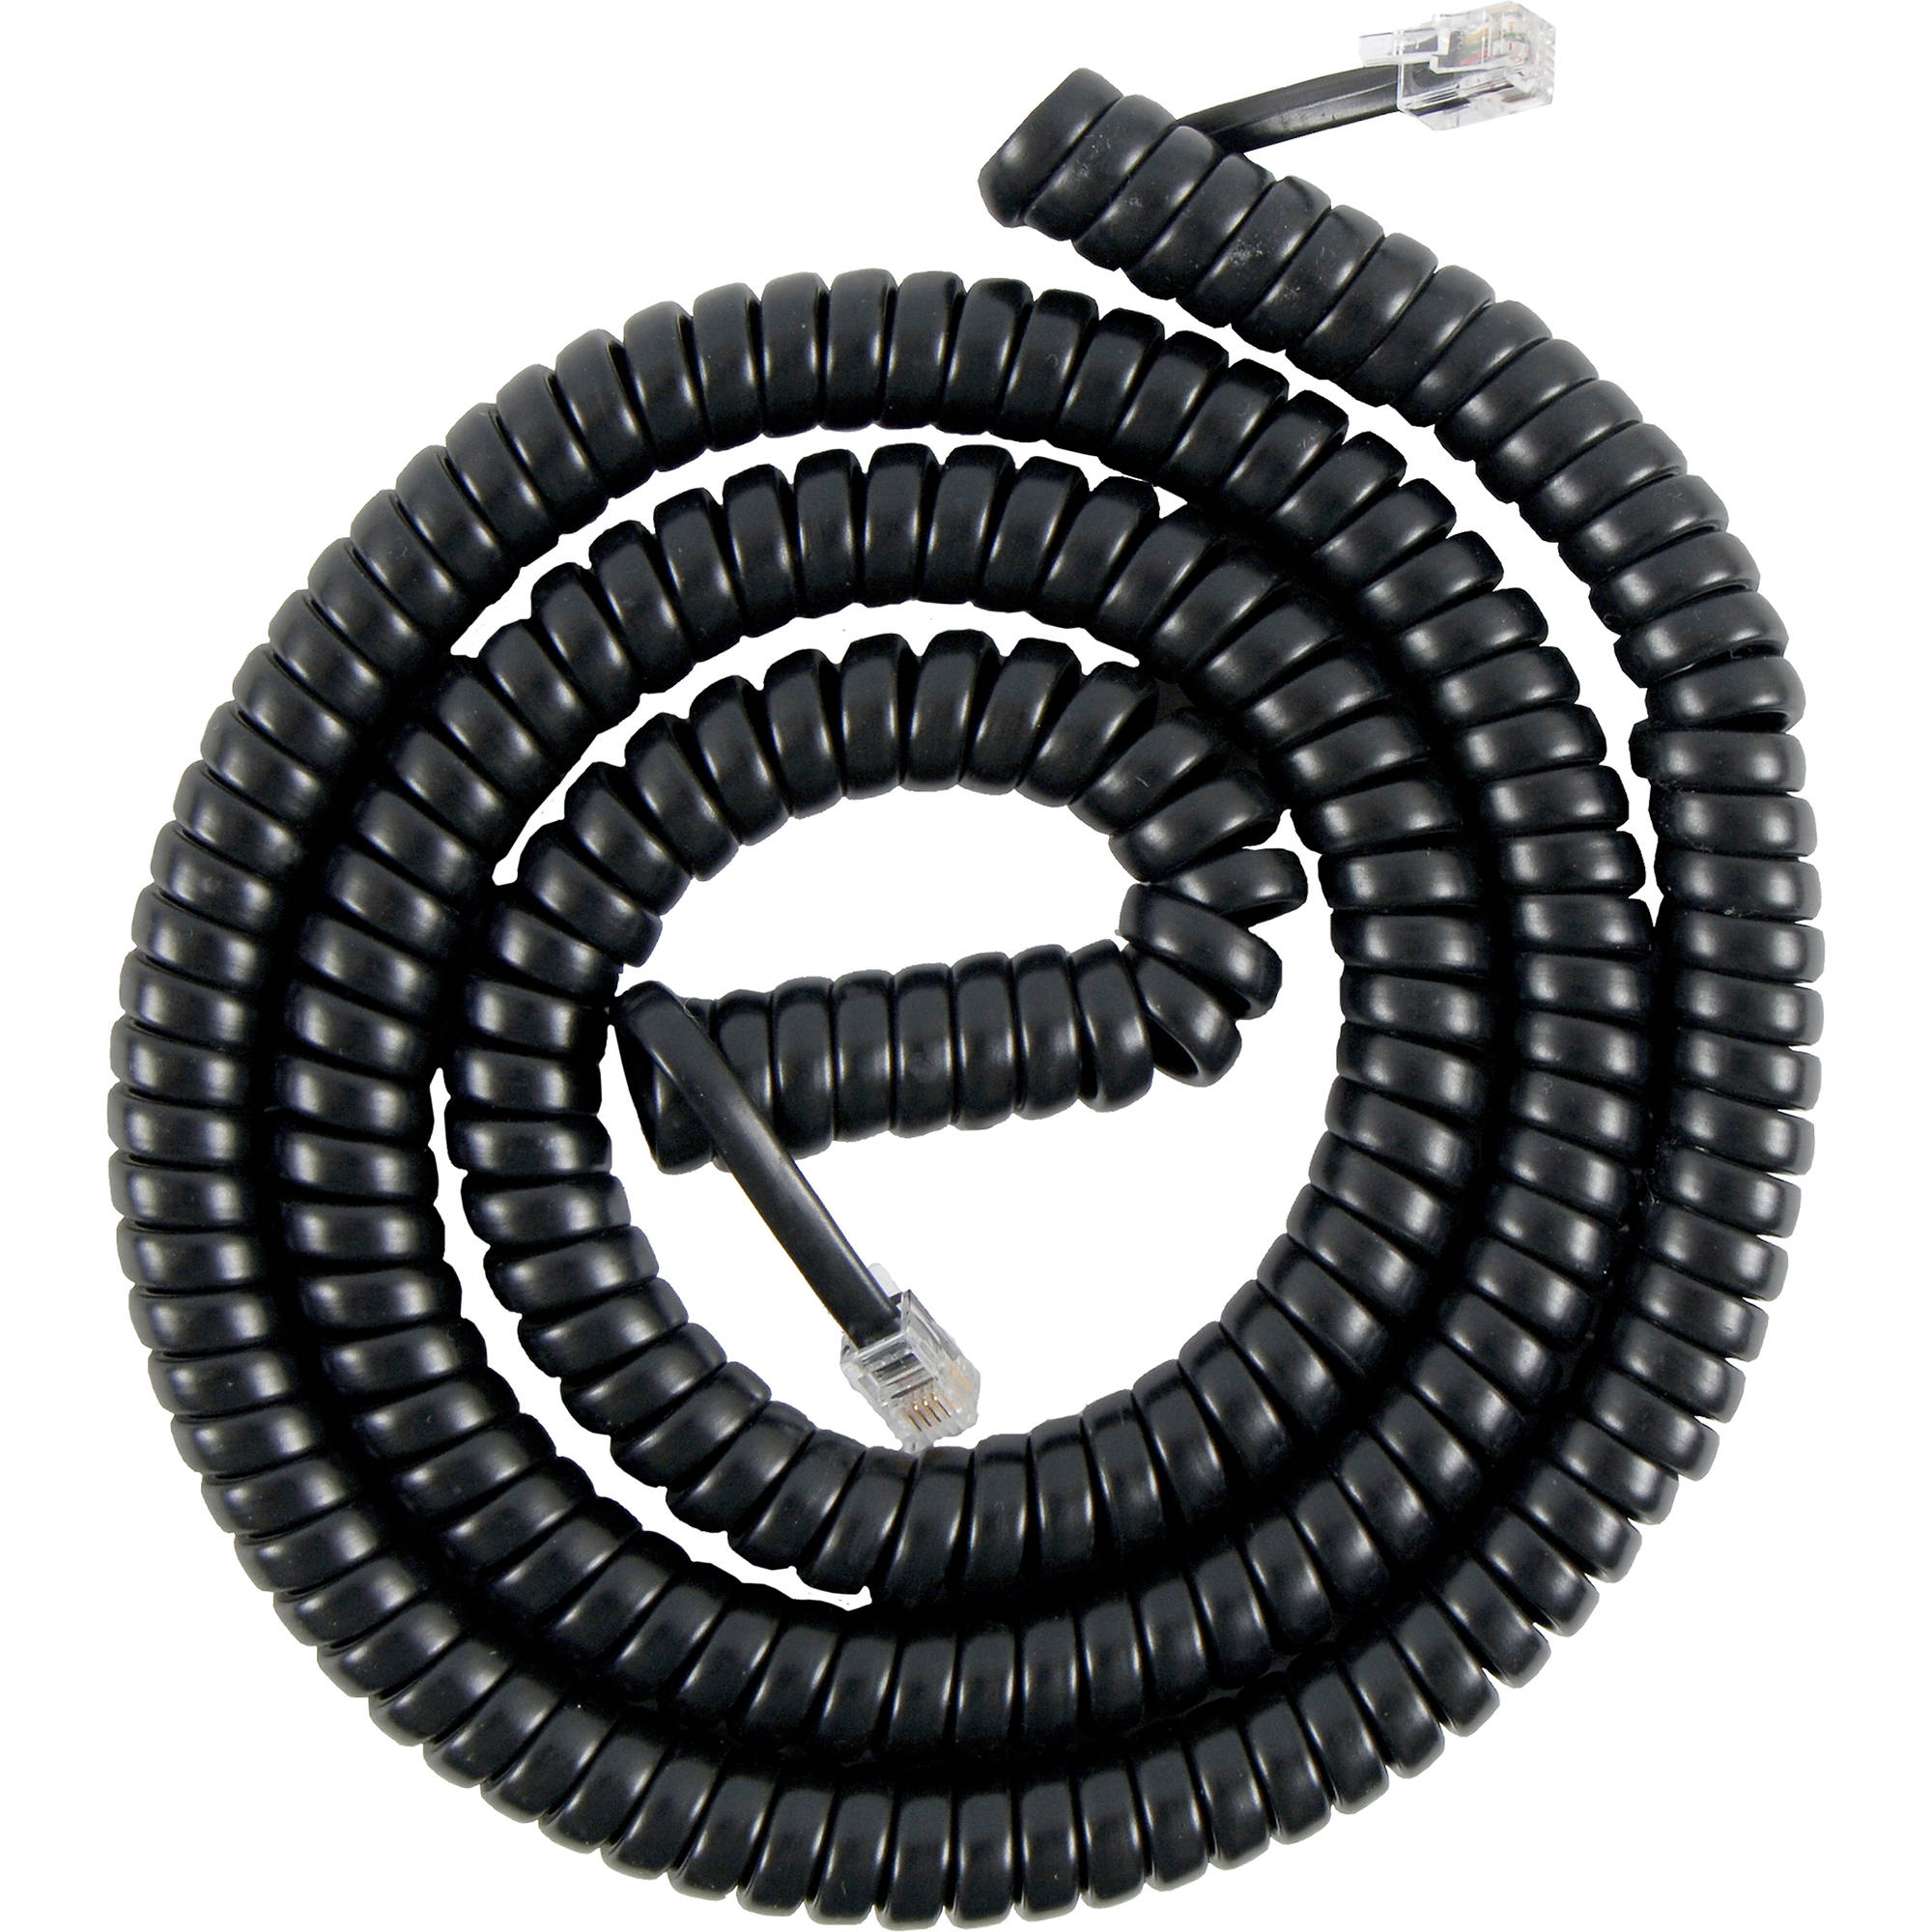 Telephone Coiled Handset Cord, 15 Ft., Black - image 1 of 2